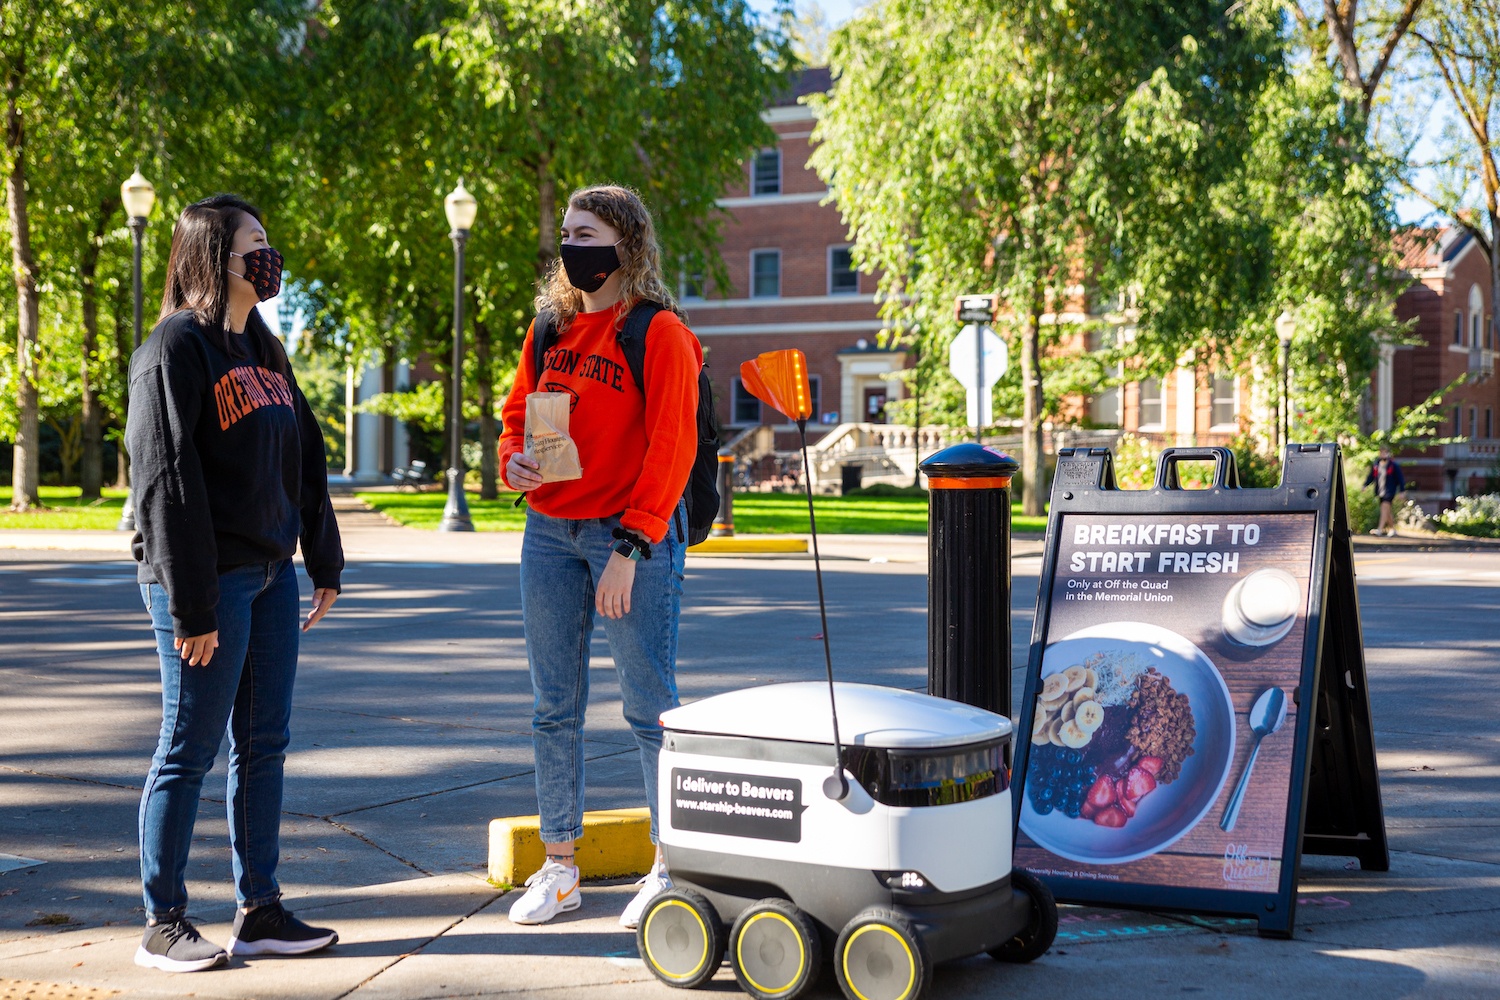 A delivery robot, students, and breakfast sign on a curb at Oregon State University. November 2020